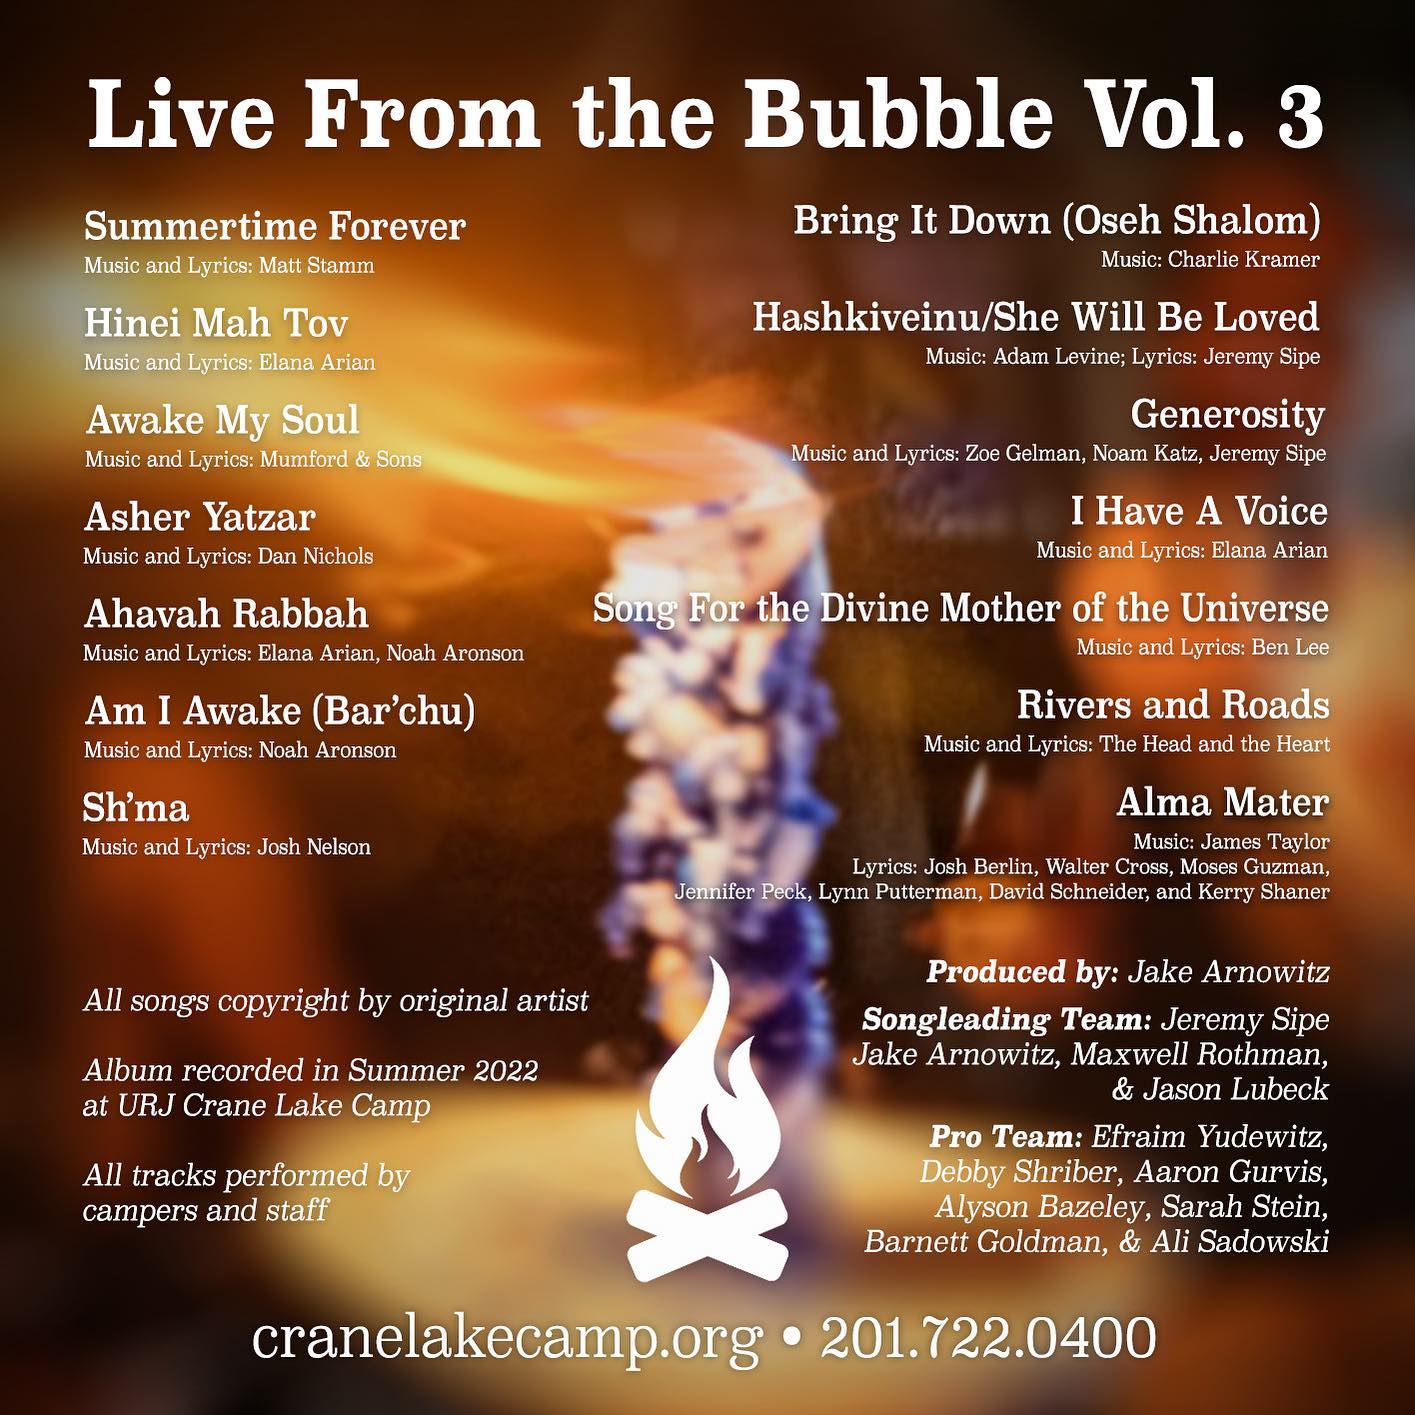 Happy last night of Hanukkah, CLC! Celebrate by streaming Live From the Bubble: Volume 3 using the link in our bio